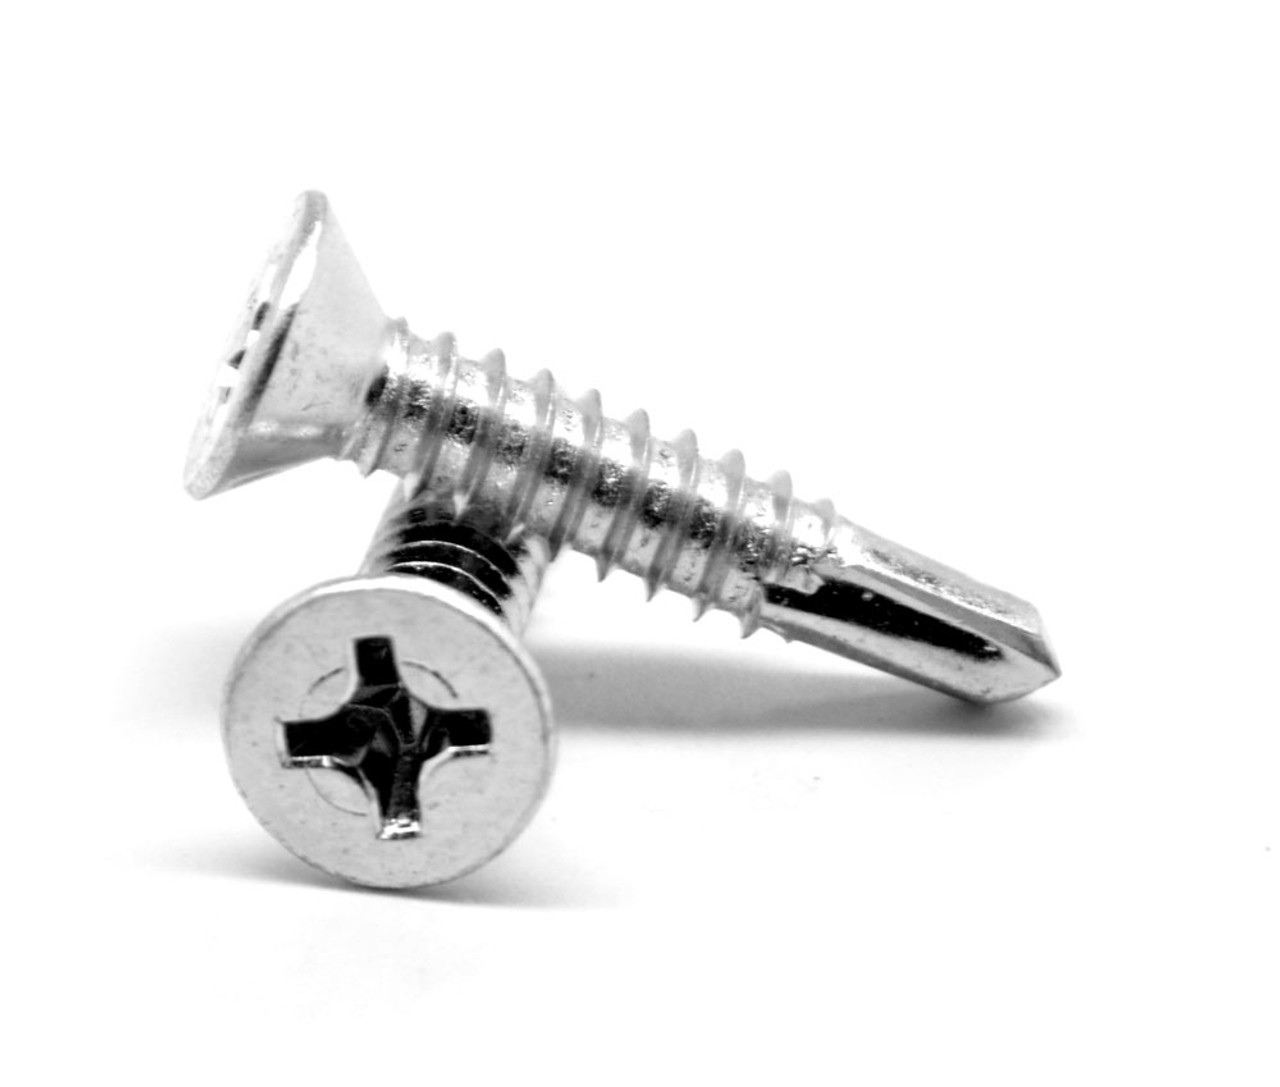 #12-14 x 1 1/4" (FT) Self Drilling Screws Phillips Flat Head #3 Point Stainless Steel 410